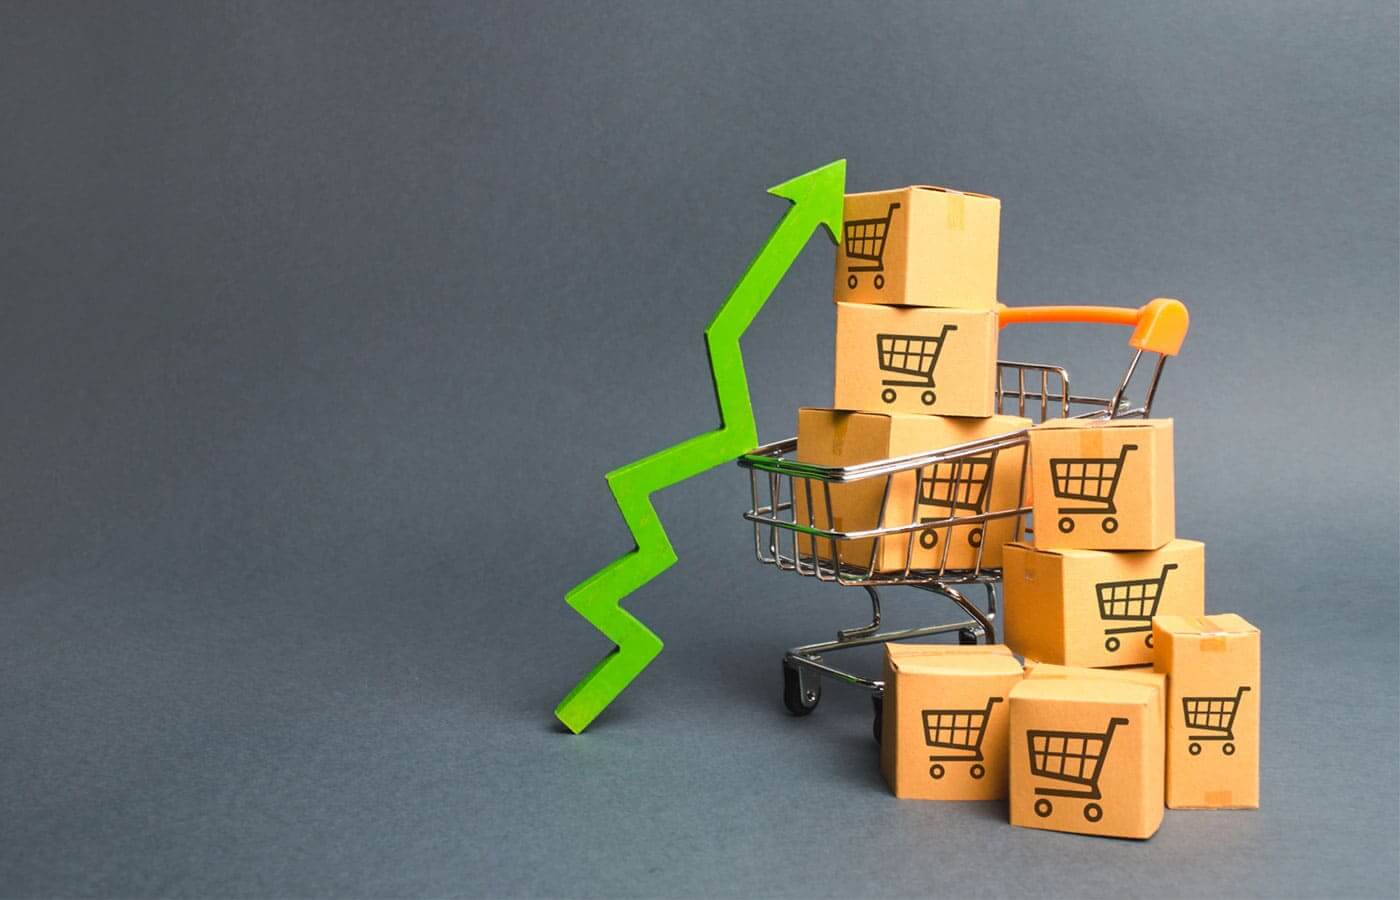 Shopping cart full of boxes as online spending increases